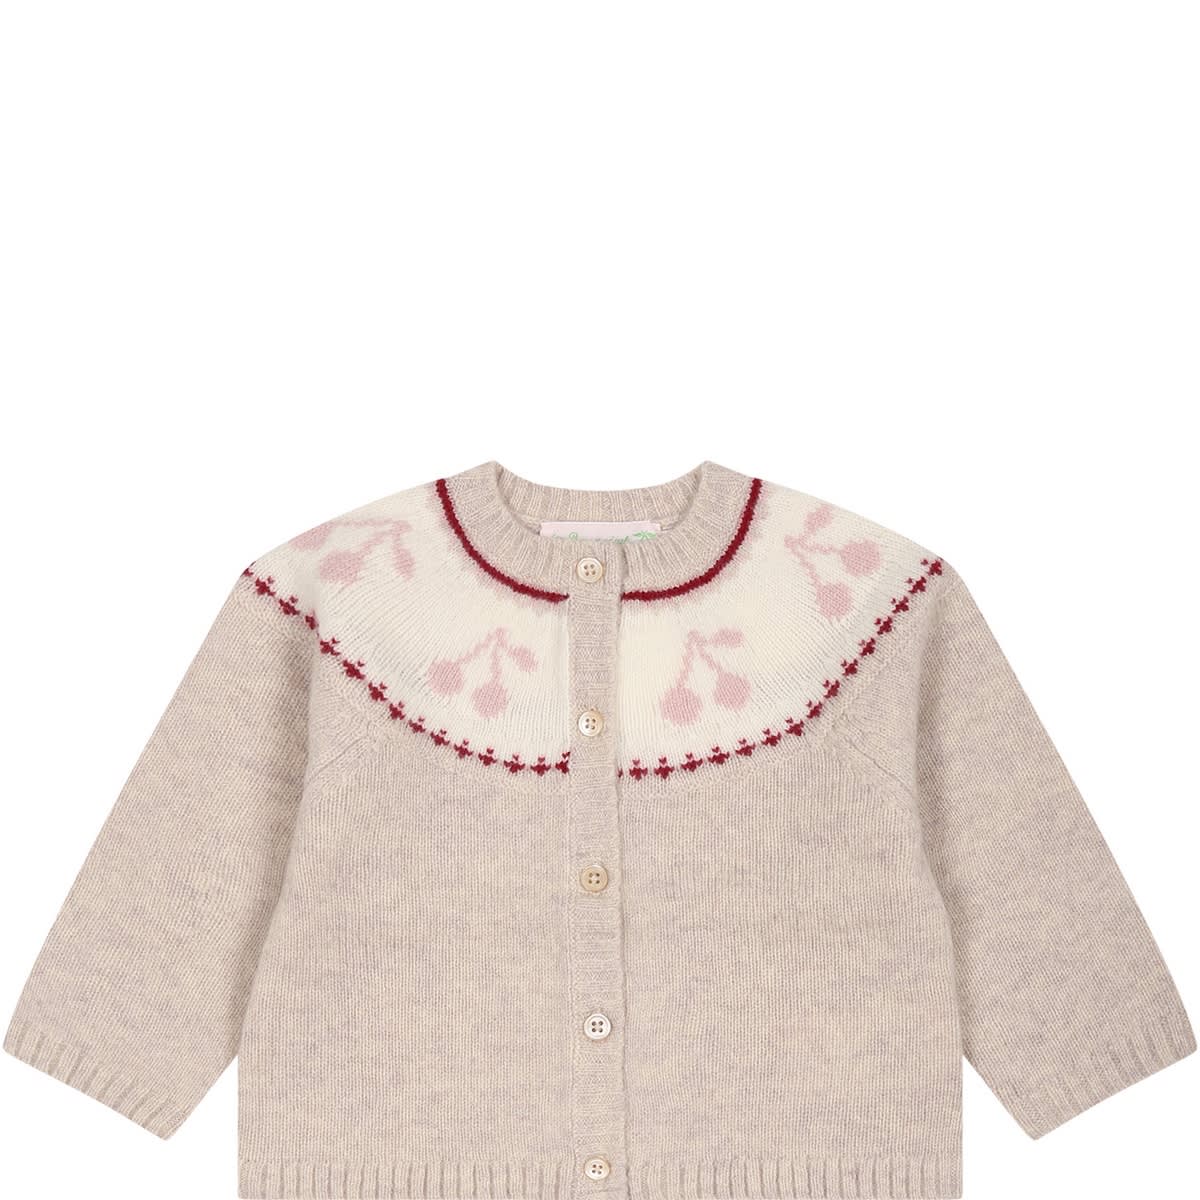 BONPOINT PINK CARDIGAN FOR BABY GIRL WITH CHERRIES